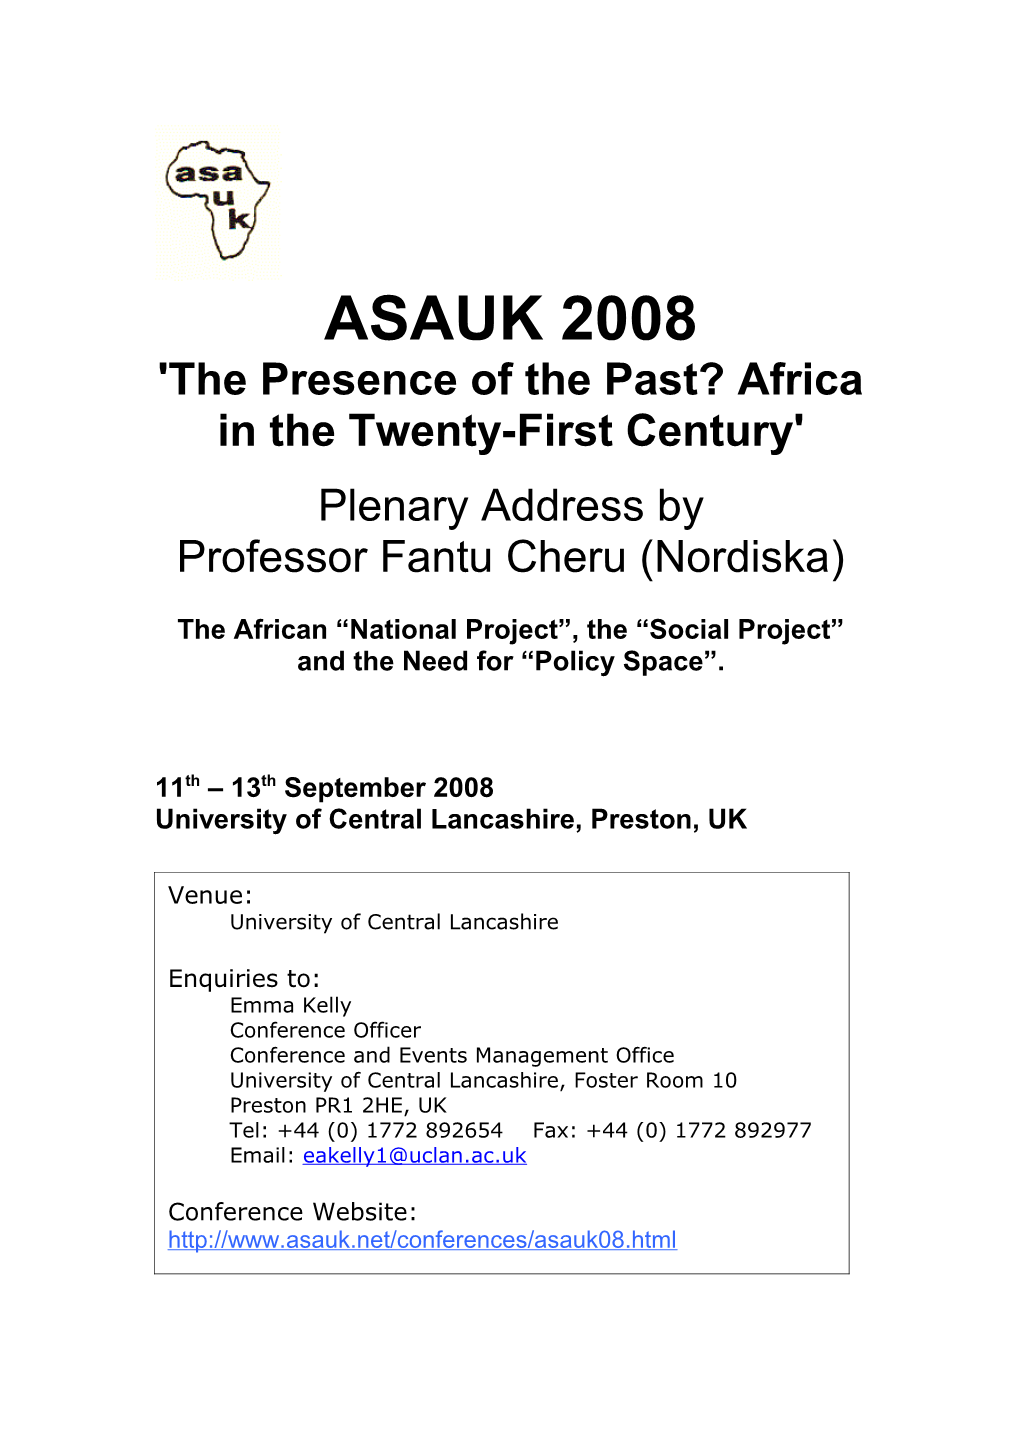 'The Presence of the Past? Africa in the Twenty-First Century'